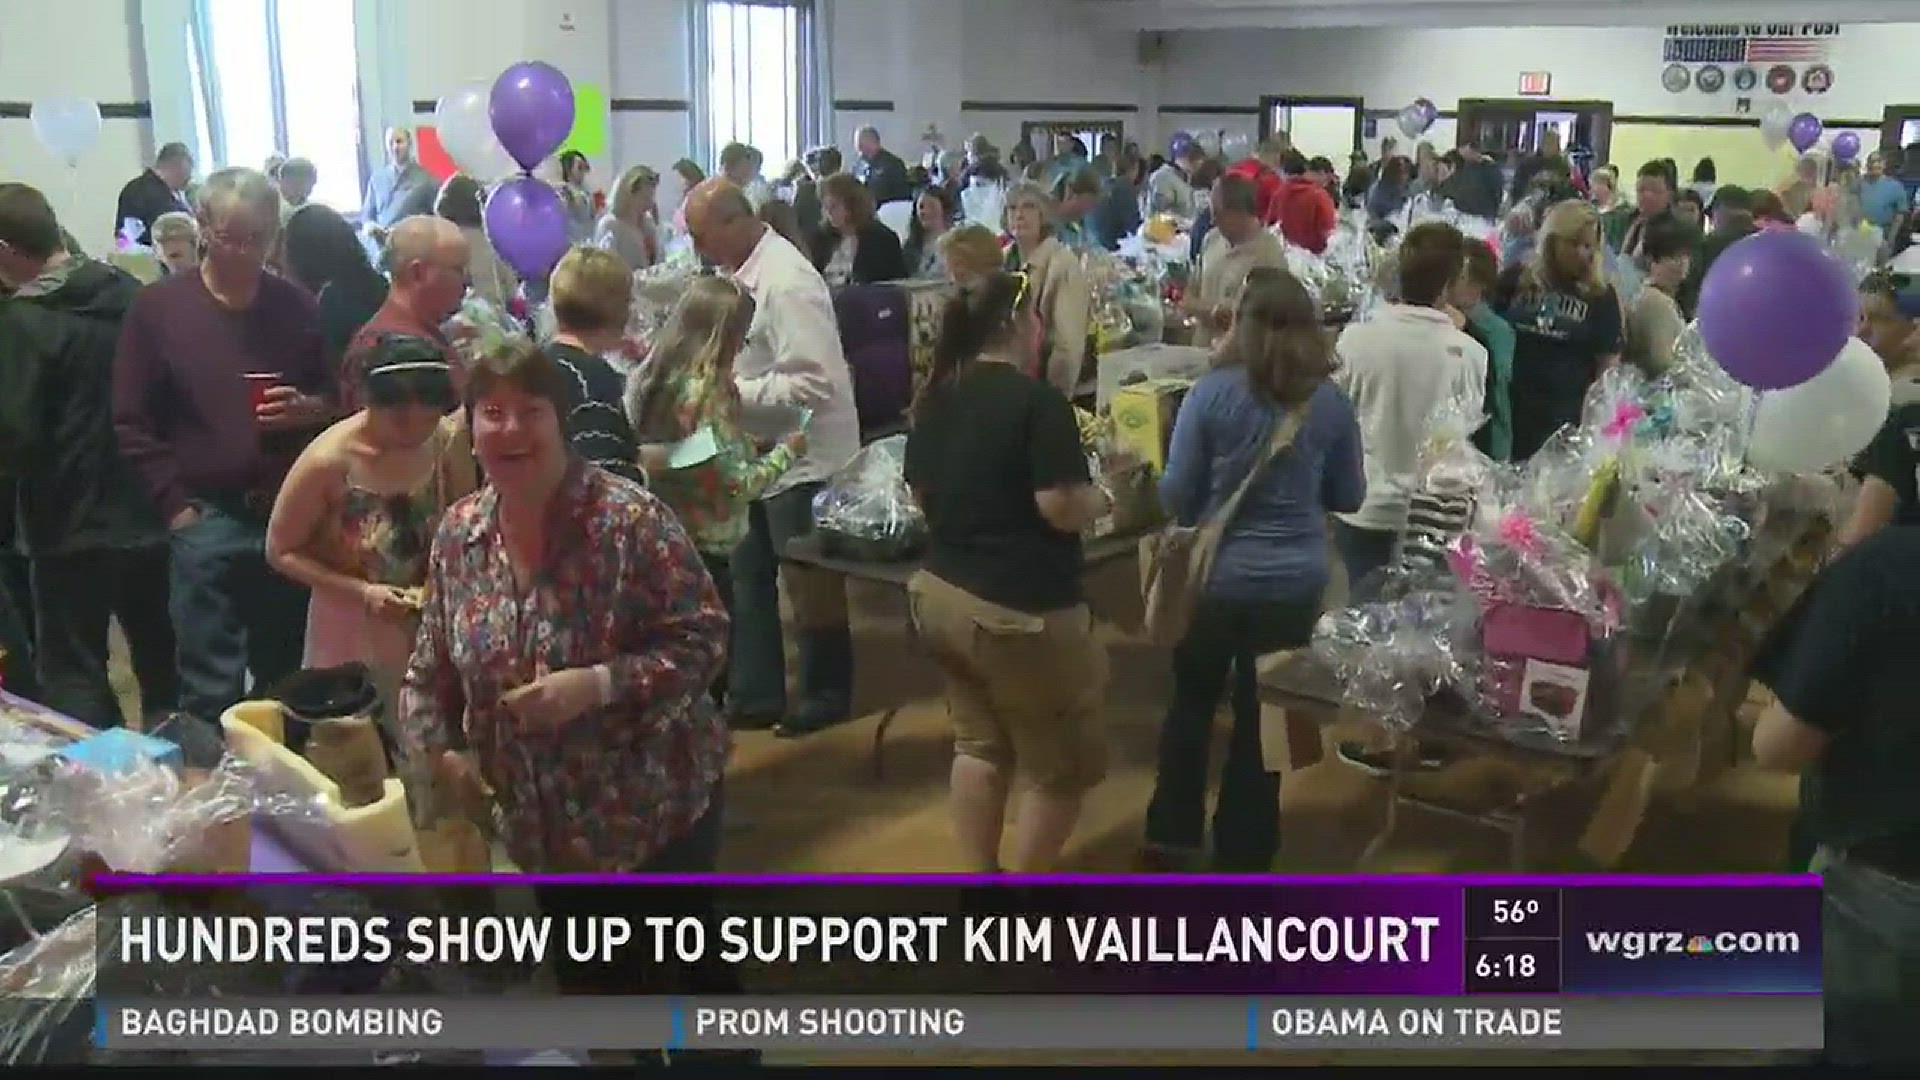 HUNDREDS SHOW UP TO SUPPORT KIM VAILLANCOURT